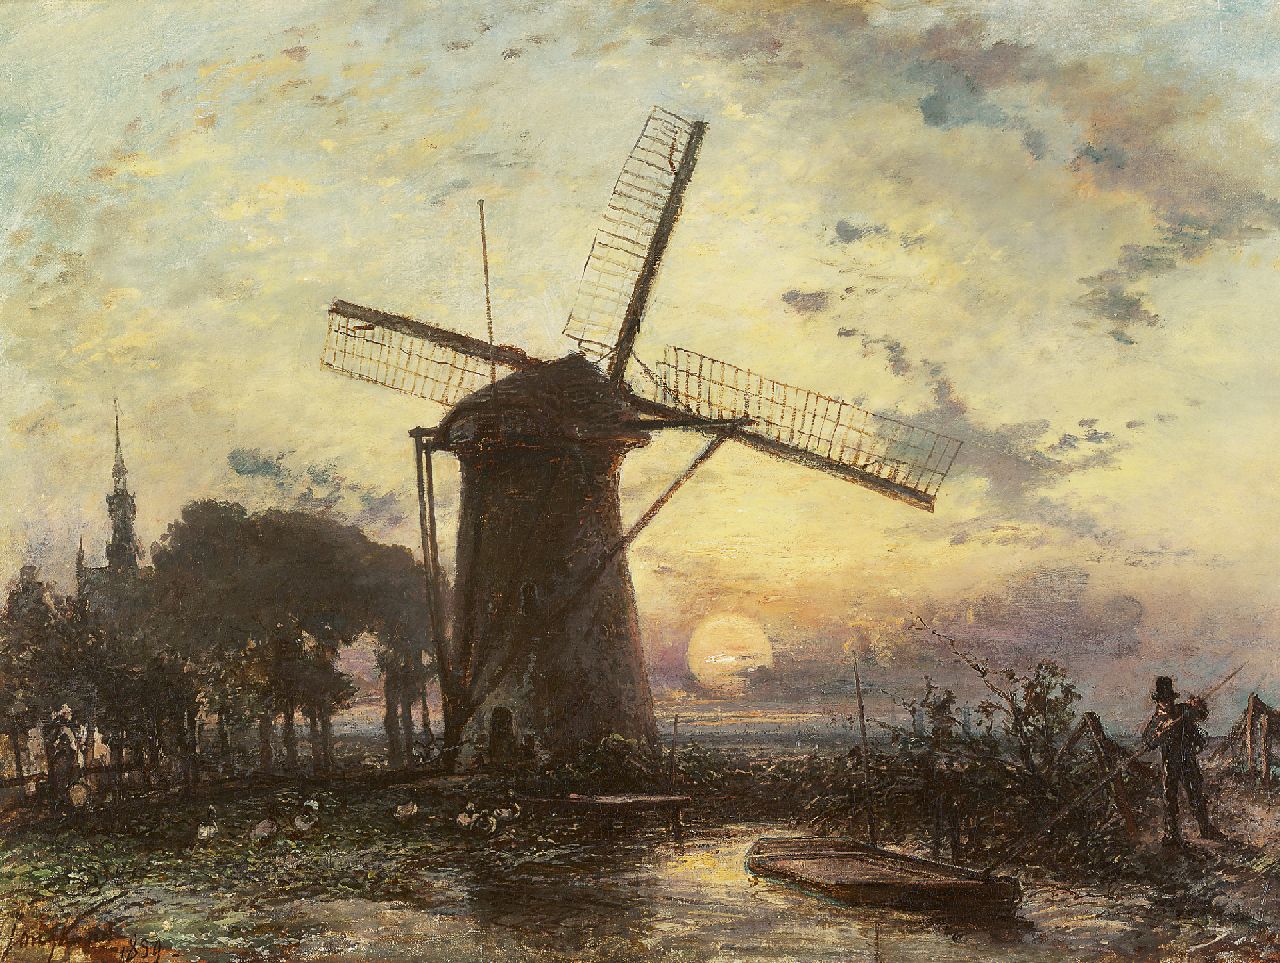 Jongkind J.B.  | Johan Barthold Jongkind | Paintings offered for sale | Windmill at sunset near Overschie, oil on canvas 42.3 x 56.2 cm, signed l.l. and dated 1859